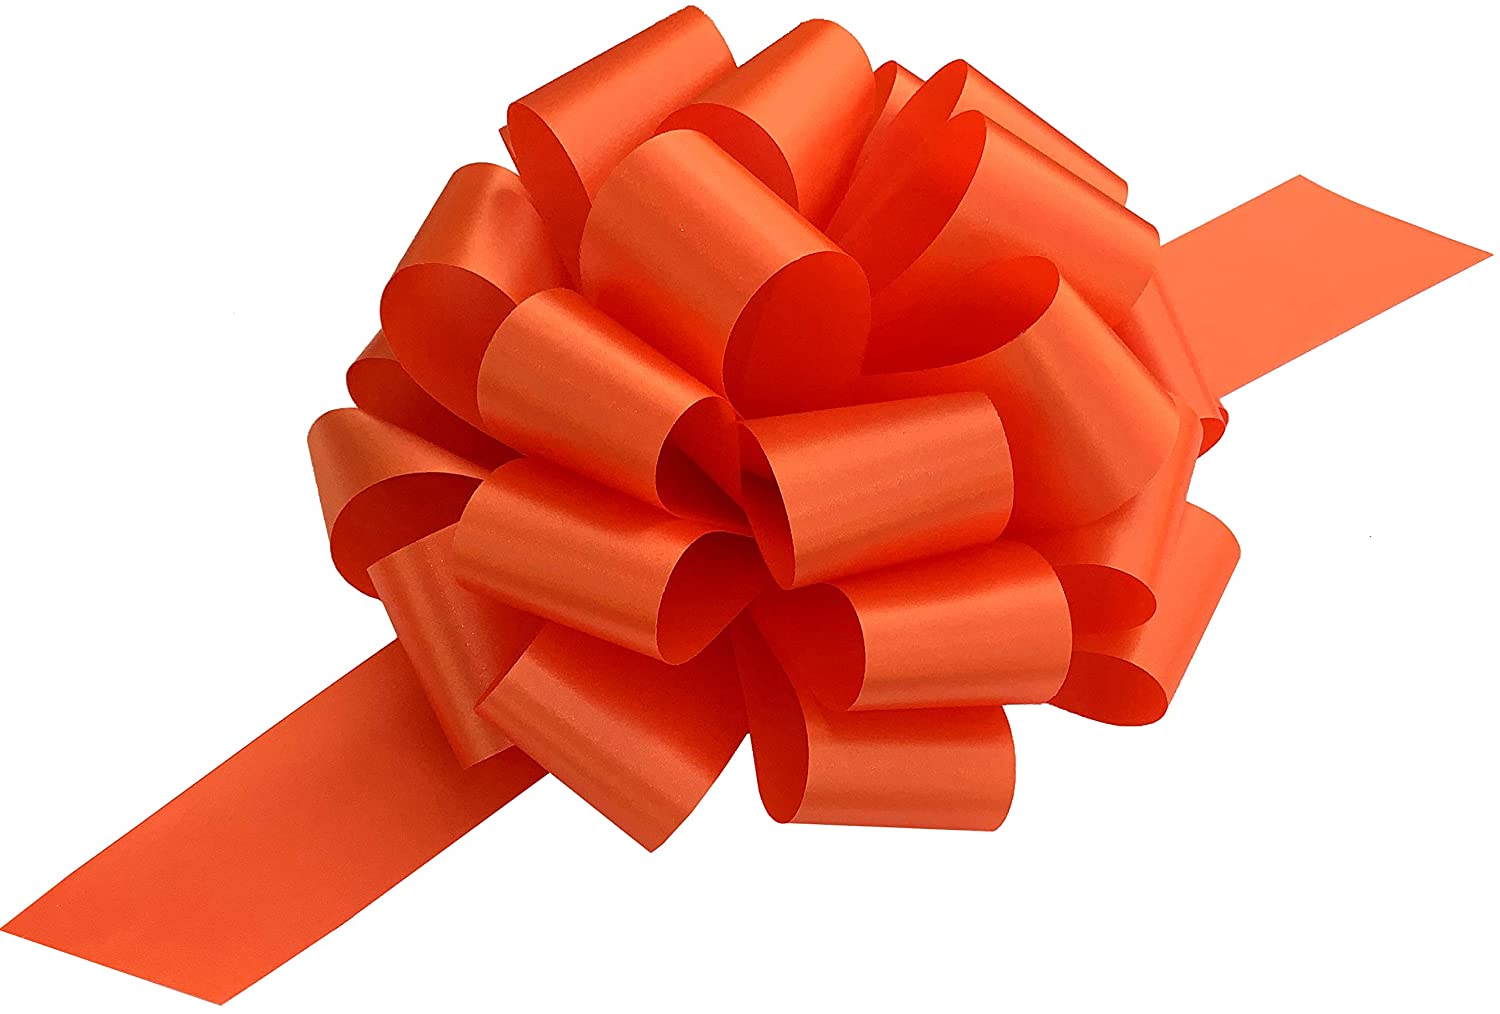 Large Orange Pull Bows - 9 Wide, Set of 6, Decorative Ribbons, Fall,  Christmas, Halloween, Easter 